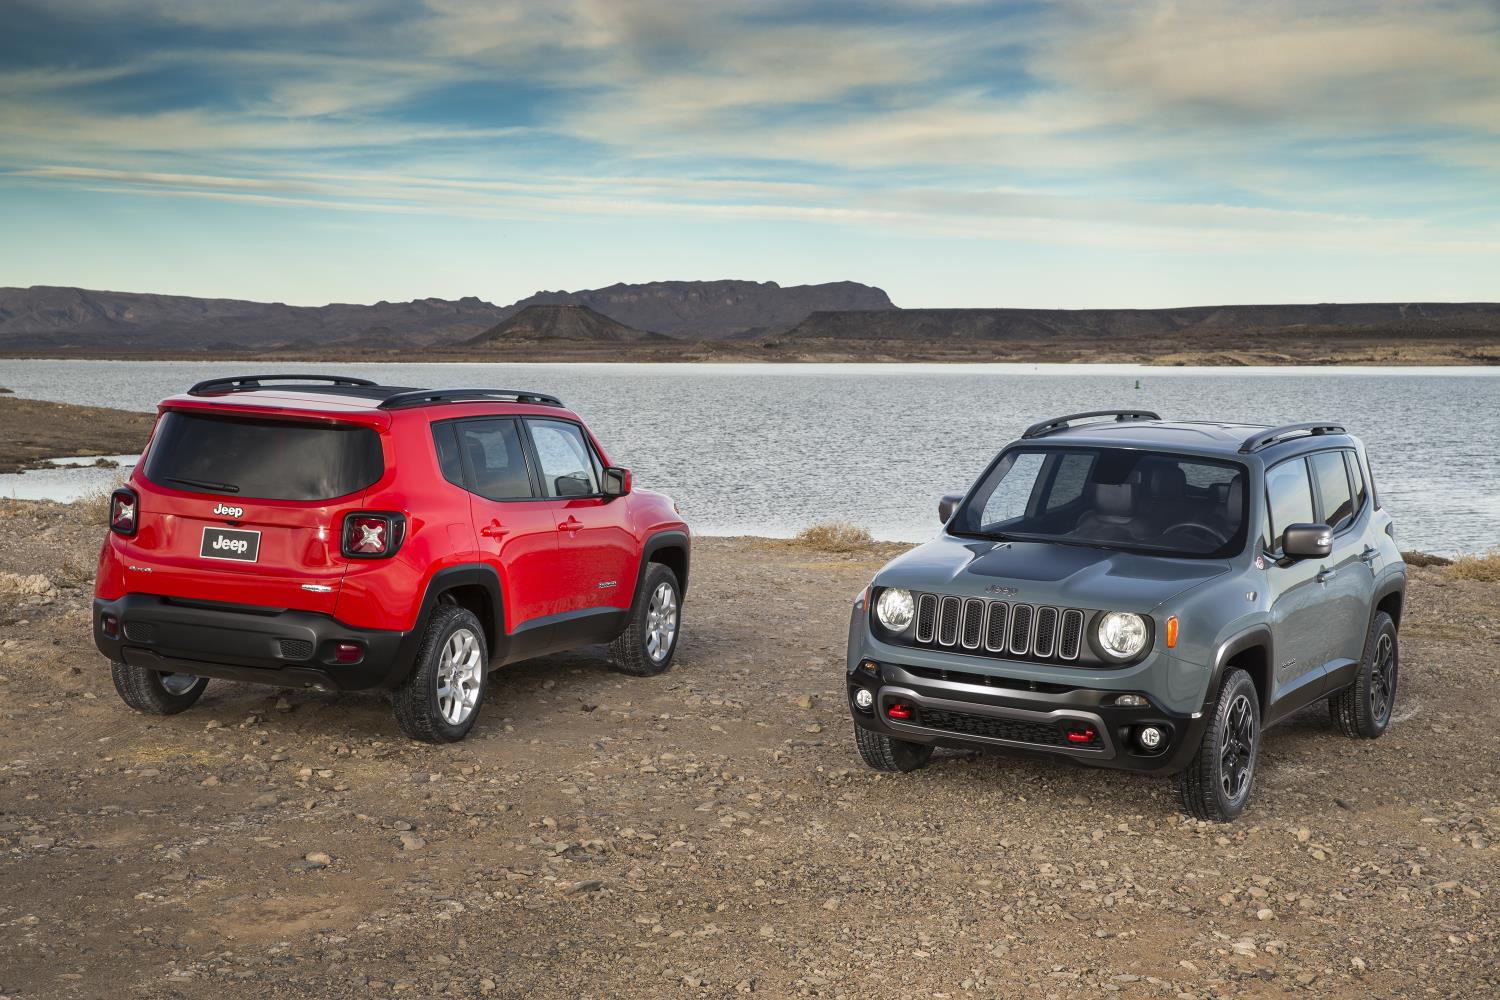 Jeep Renegade, one of Jeep's top selling vehicles in calendar year 2017